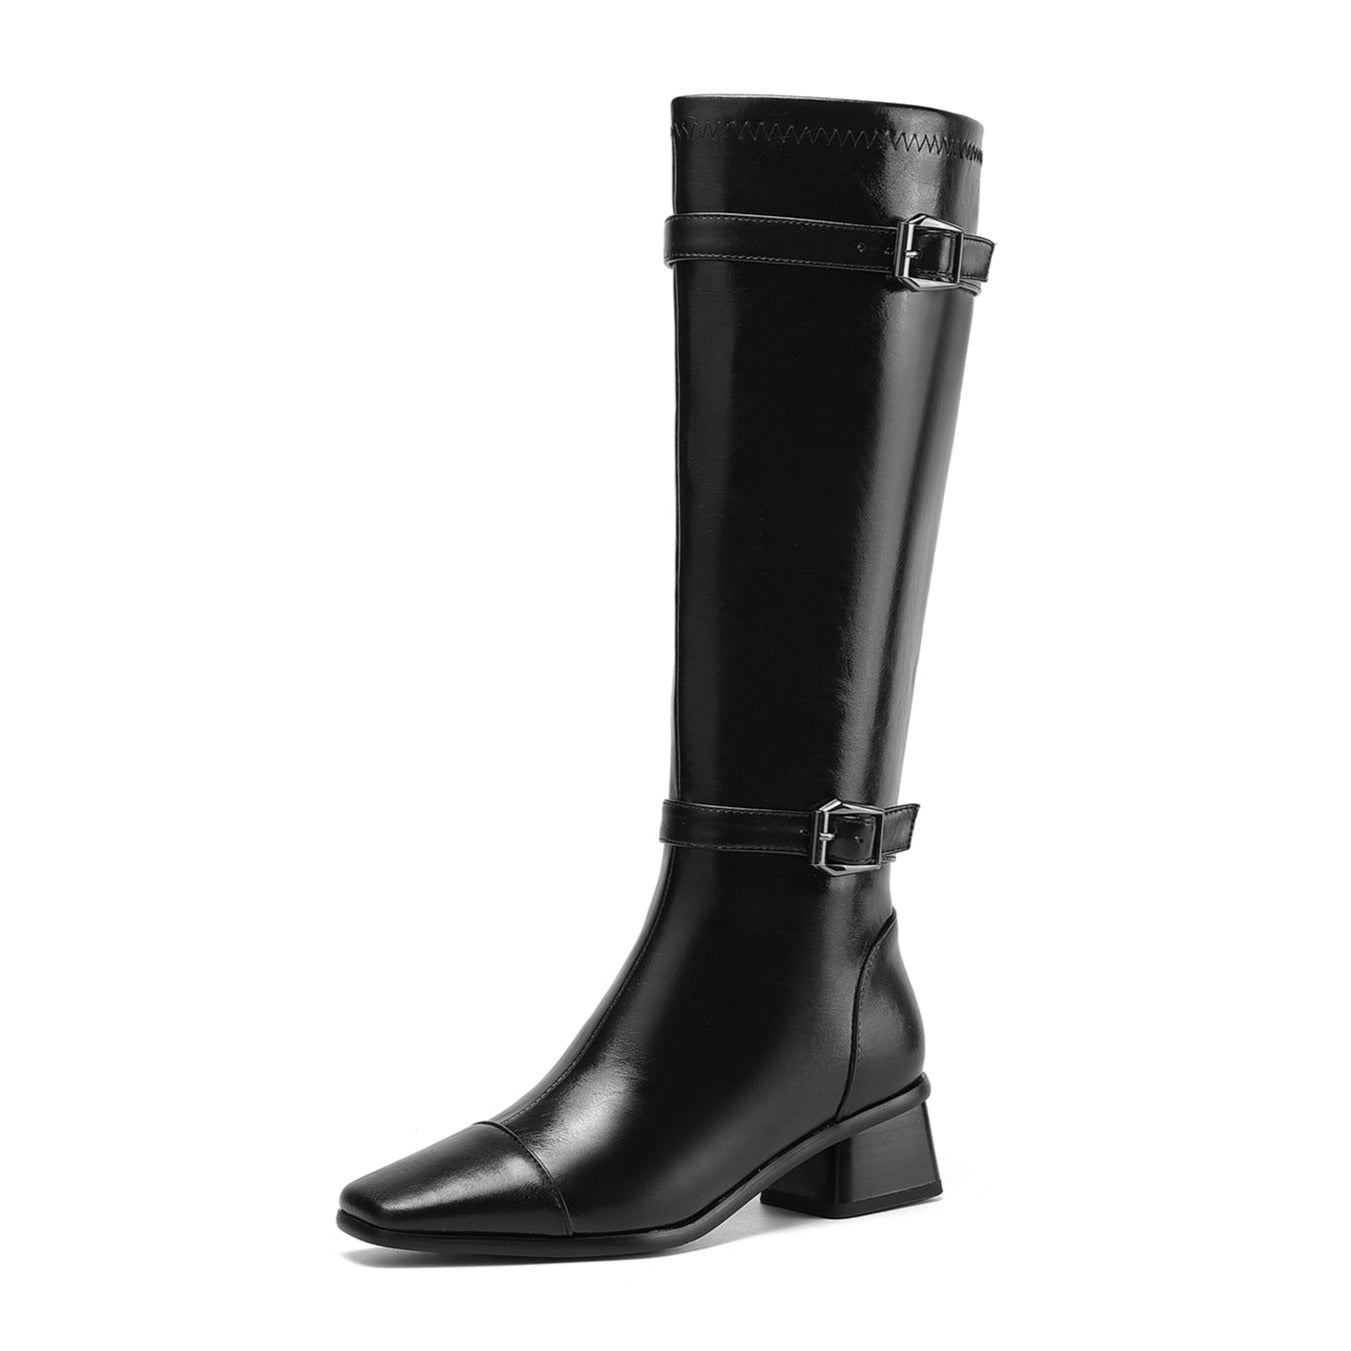 TinaCus Women's Square Toe Genuine Leather Handmade Zipper Chunky Heels Trendy Knee High Boots with Buckles